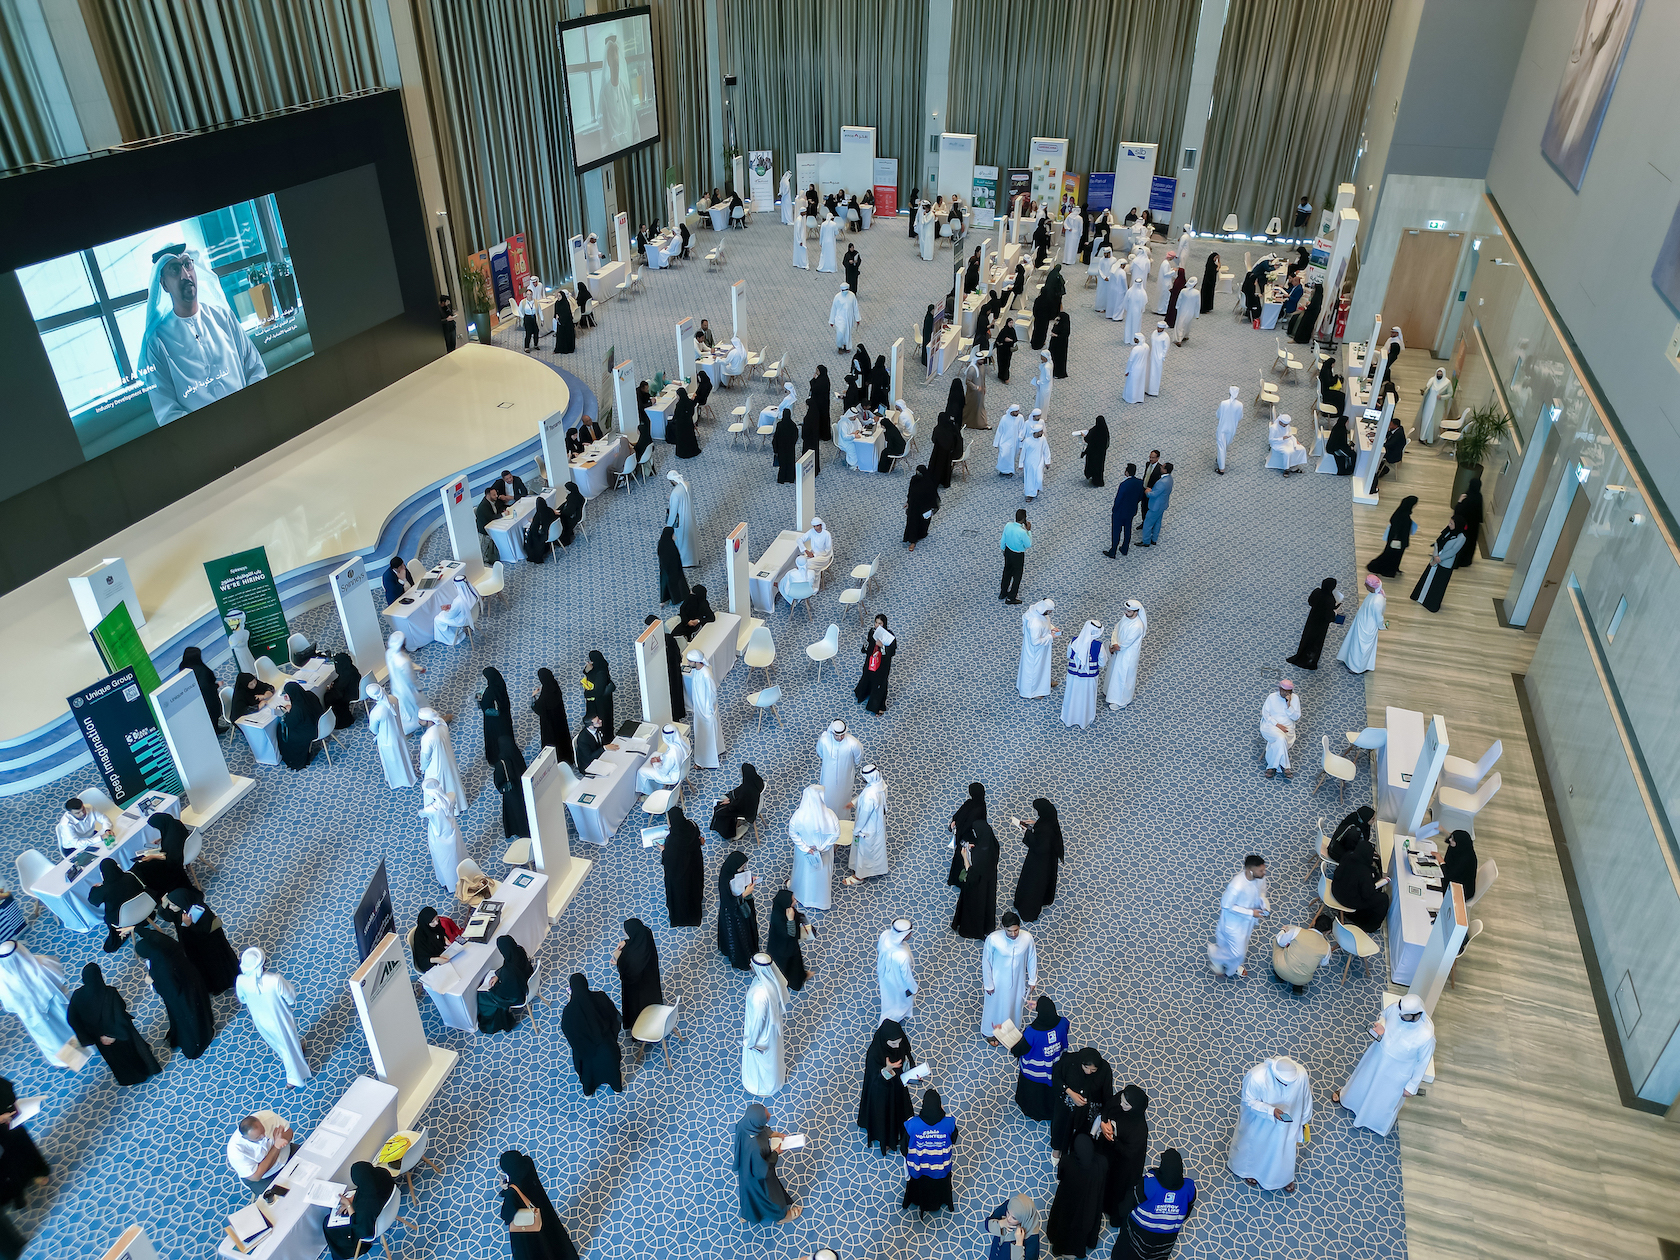 The Industrialist Career Fair concludes with more than 3,000 immediate-hire interviews for Emirati talent across the UAE